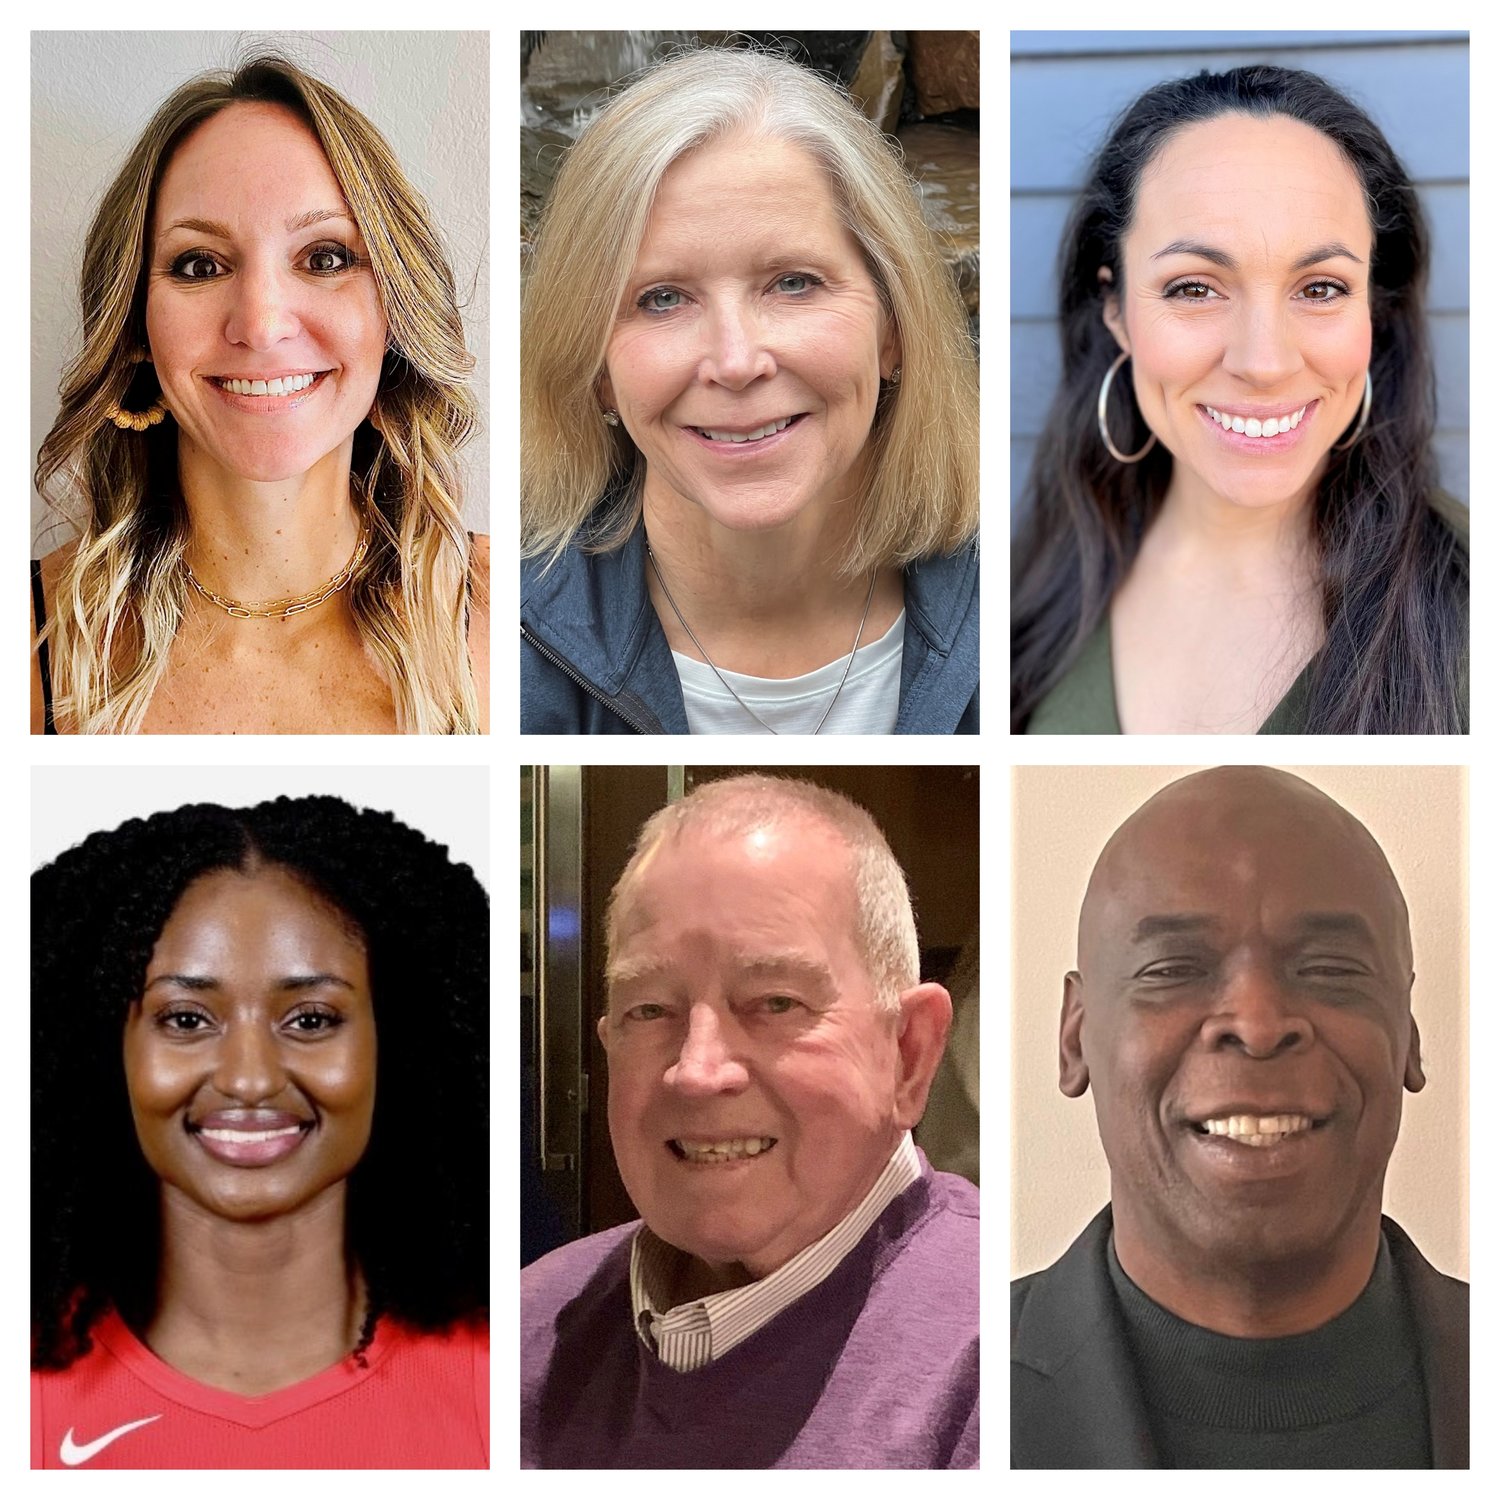 The Class of 2023 of the Fayetteville Sports Club Hall of Fame was named Tuesday. They are: Top row, from left, Courtney Willis Colborne, Marsha Kouba and Rachel Yepez Rogers; bottom row, from left, LaToya Pringle Sanders, Gary Weller and Kenneth “Kenny” Wilson.